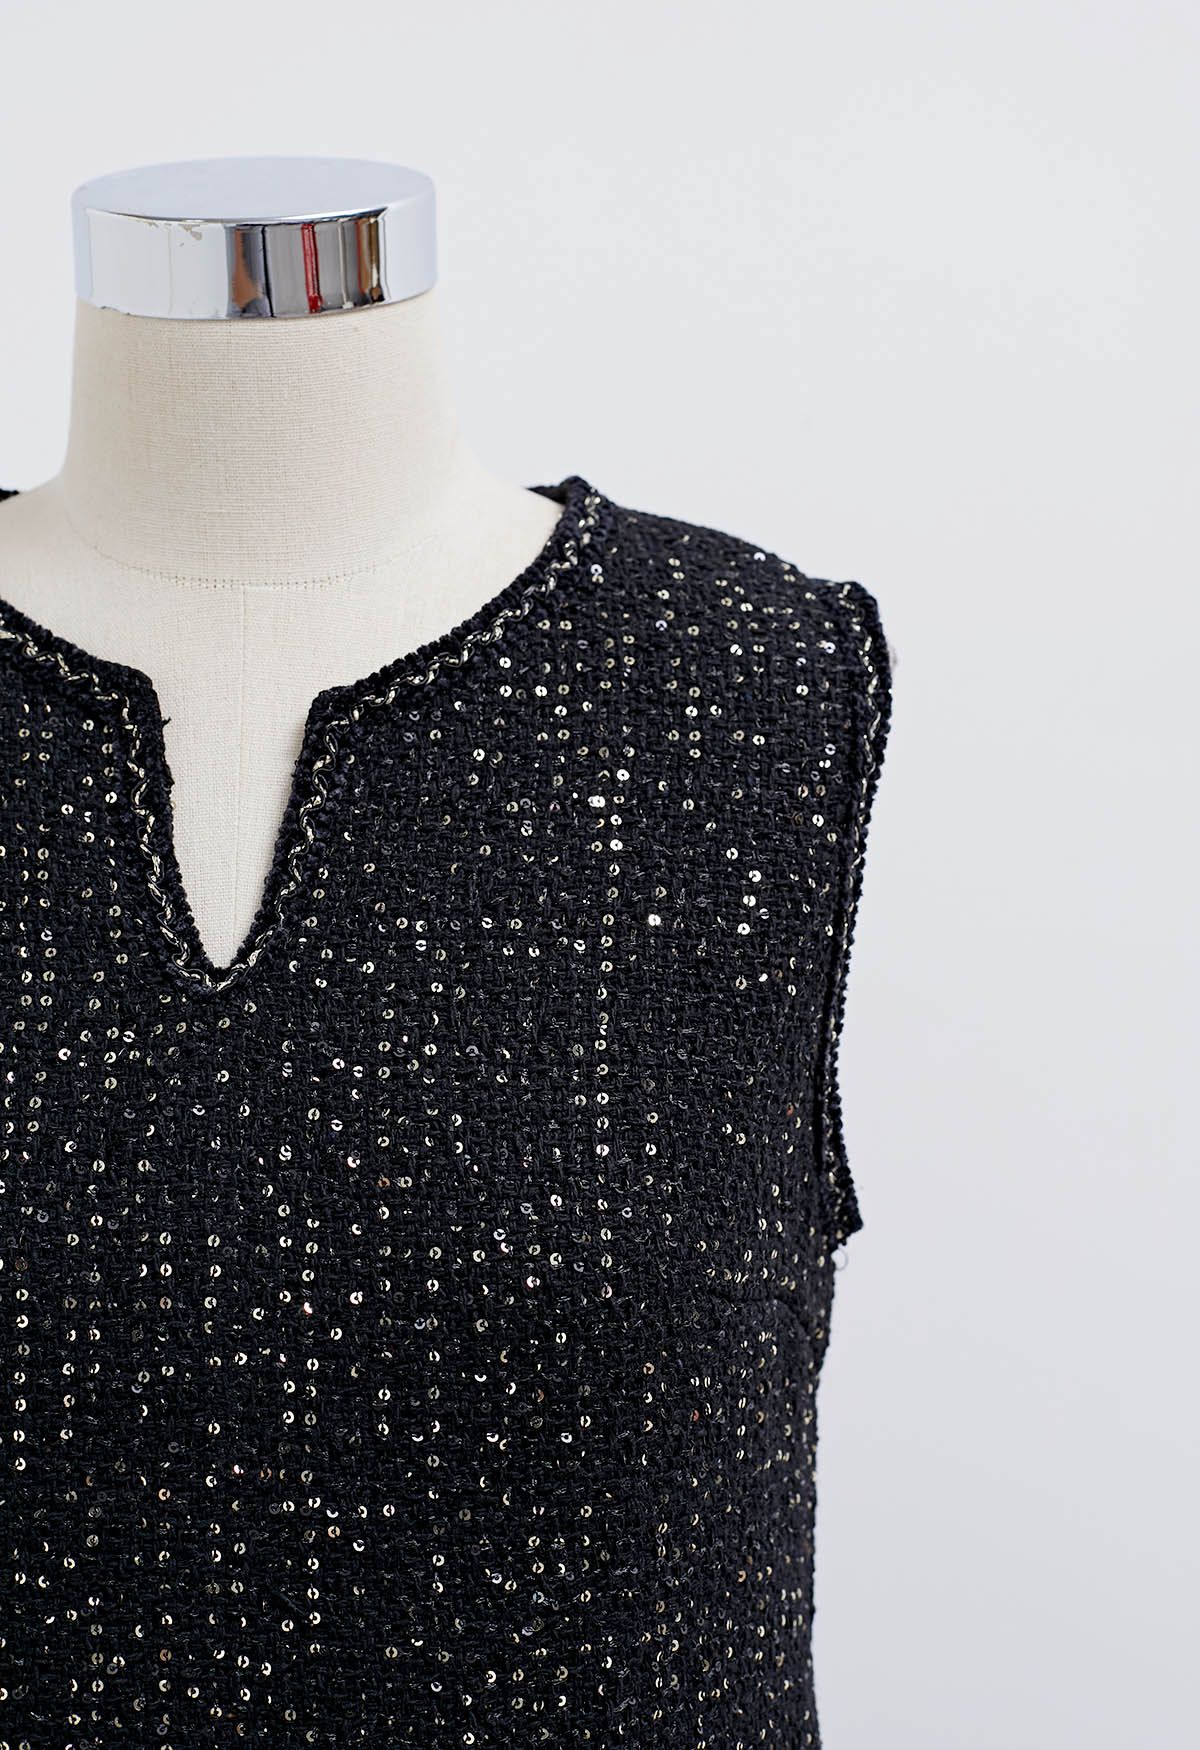 Sequin Embroidery Sleeveless Tweed Dress in Black